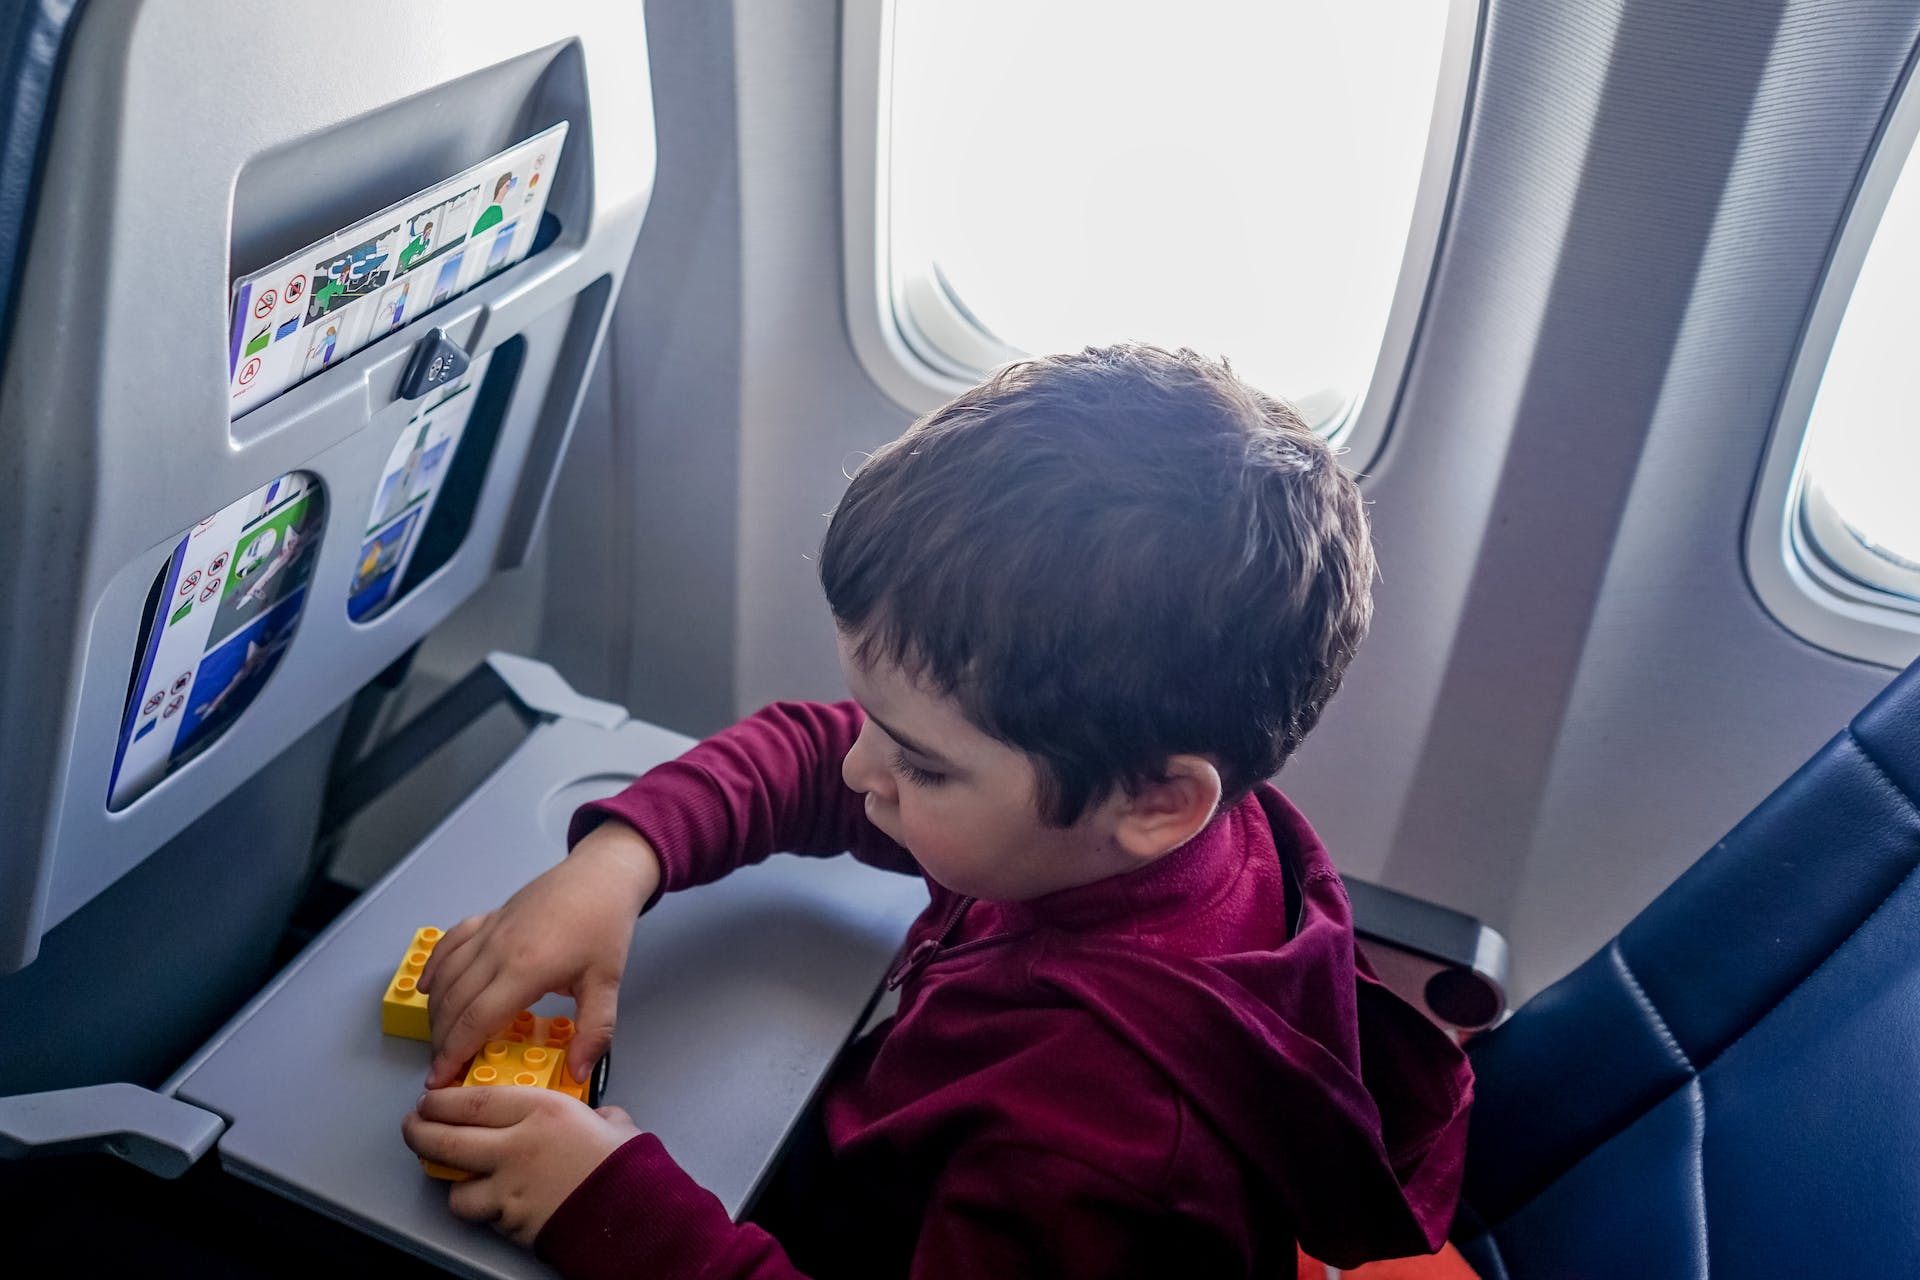 A boy playing with toys in an airplane | Source: Pexels